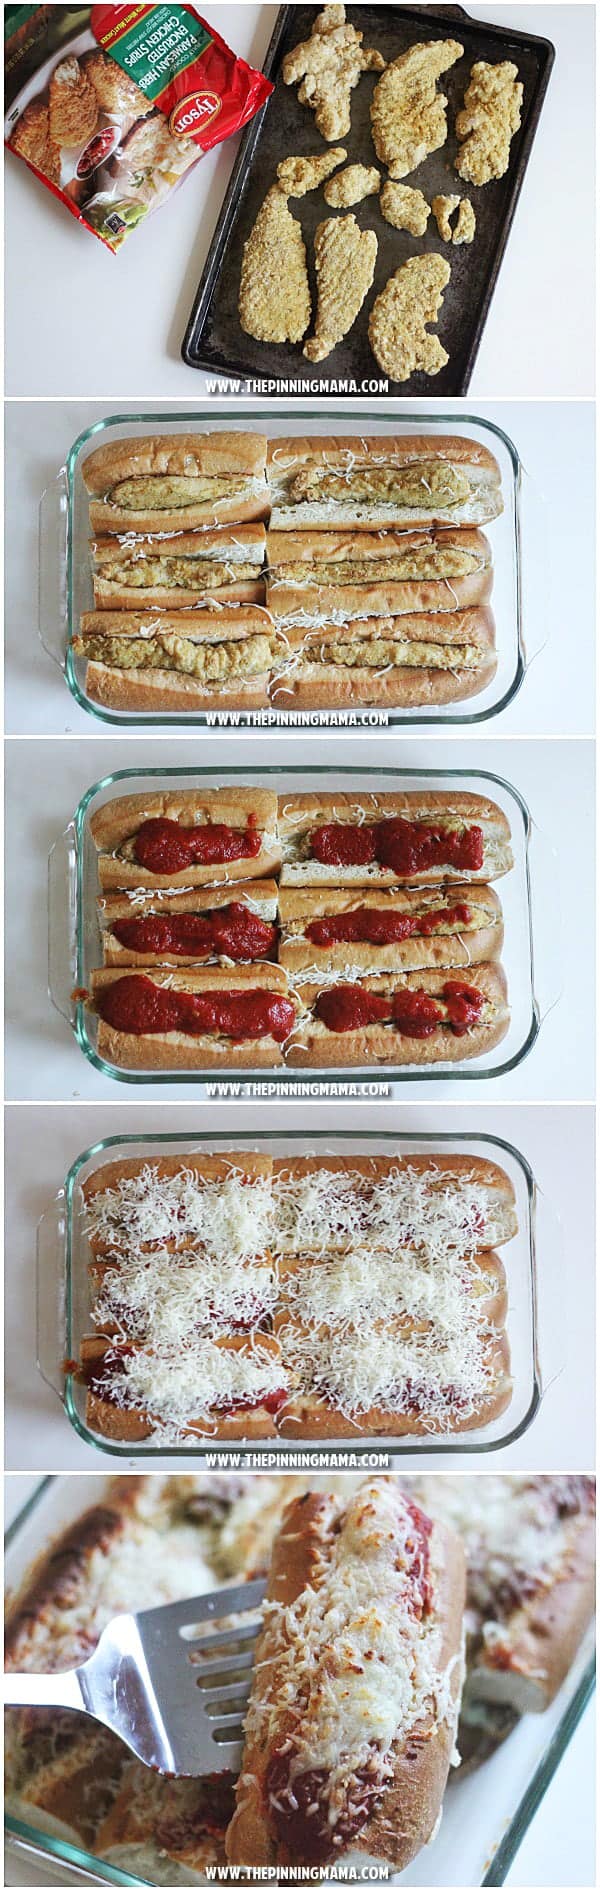 CHICKEN PARM SUB BAKE recipe- Such a great idea for a party! Just minutes of prep for enough to feed a crowd! I think this is perfect for our Super Bowl Party!